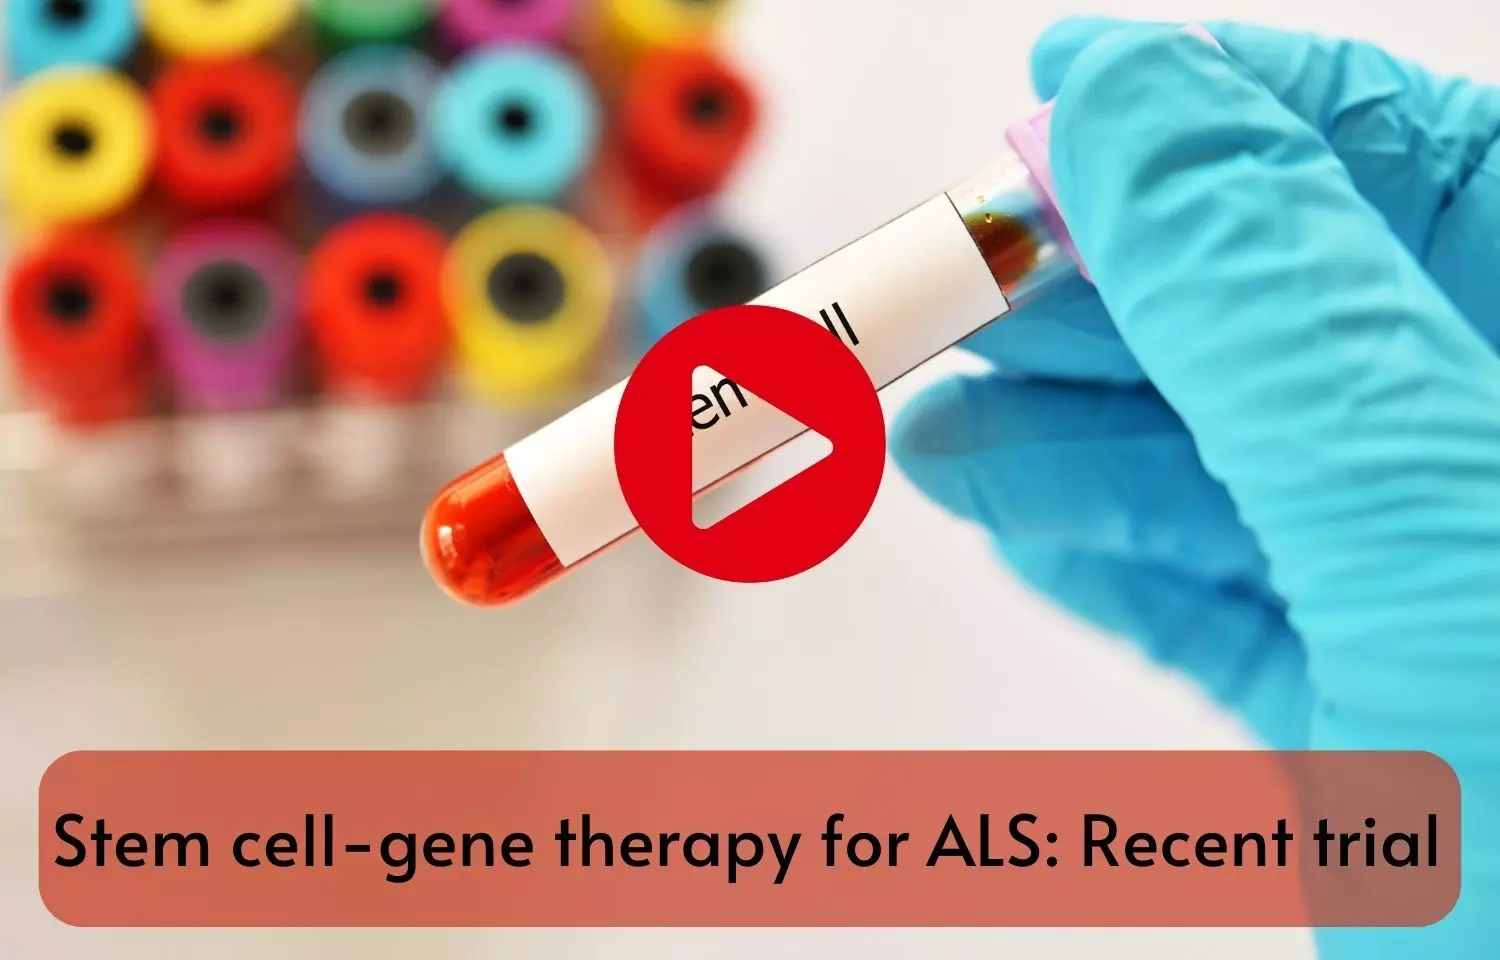 Stem cell-gene therapy for ALS: Recent trial